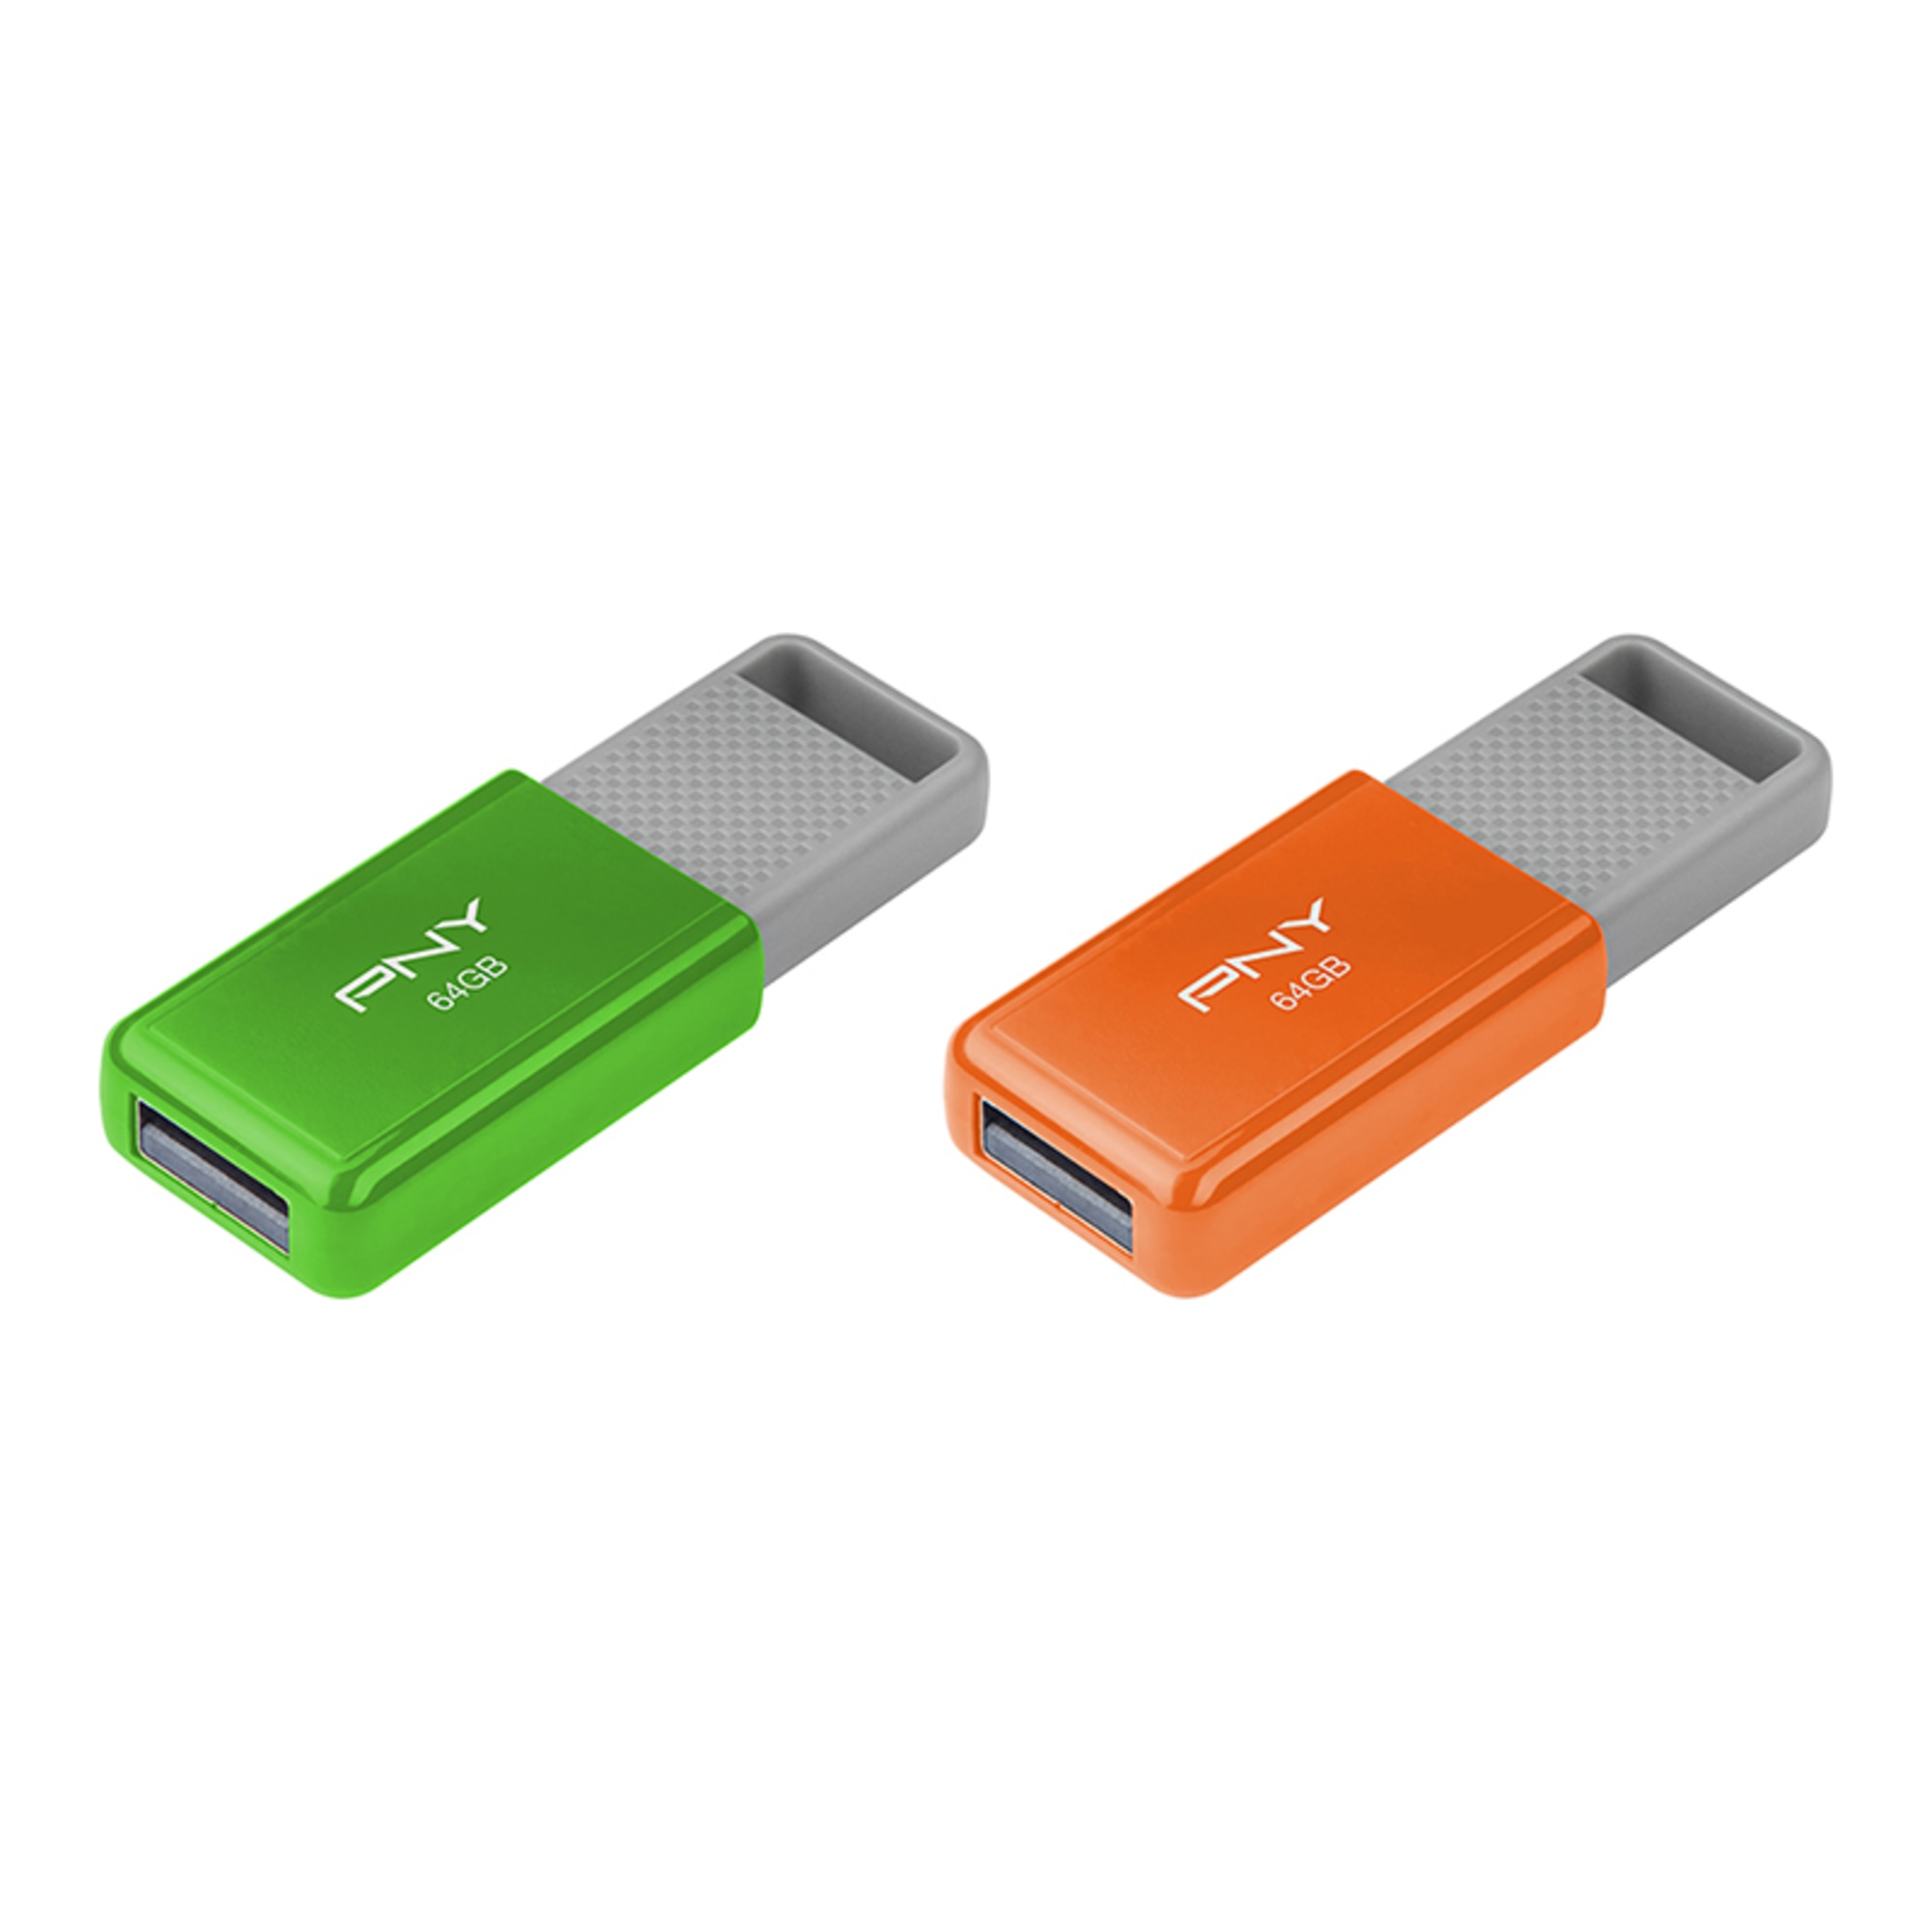 PNY USB 2.0 Flash Drives, 64GB, Pack Of 2 Flash Drives - image 1 of 7